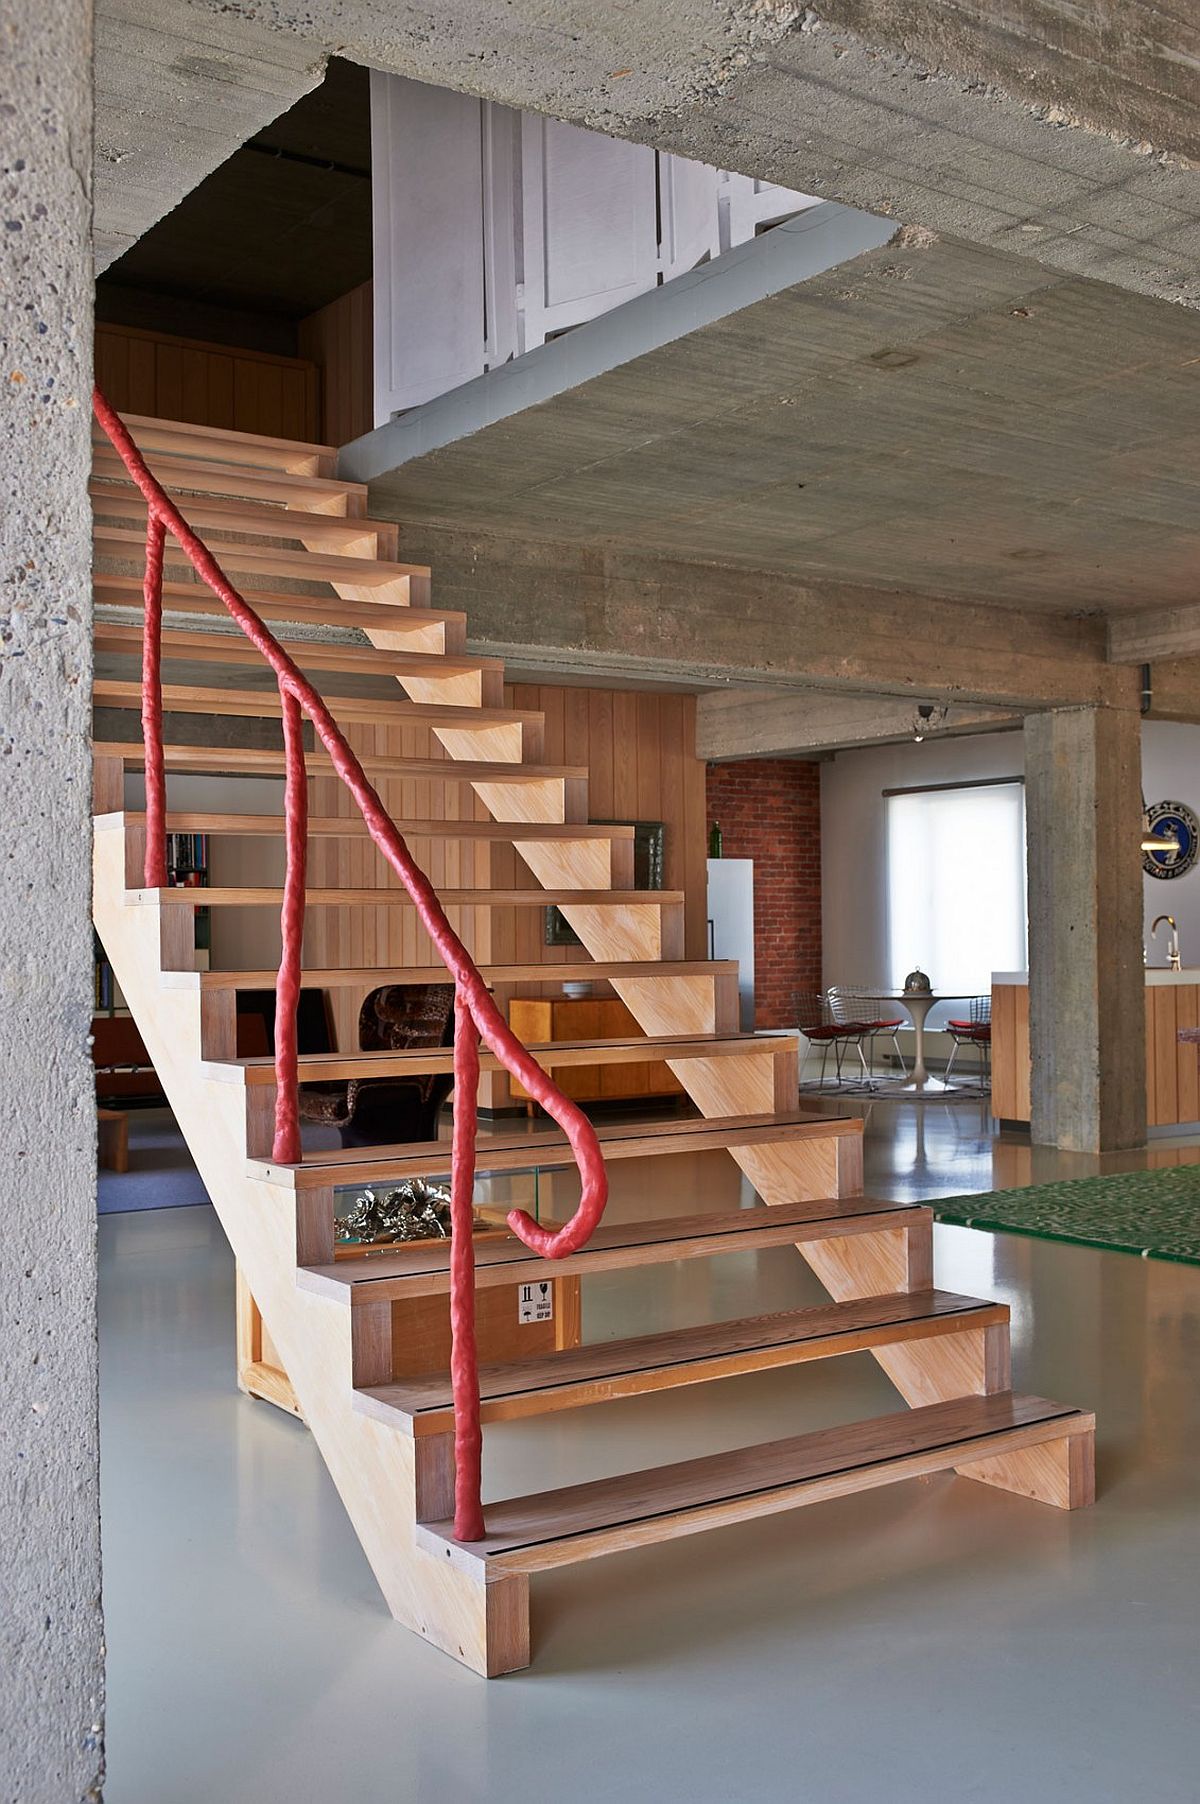 Striking wooden staircase with unqiue, colorful railing connects the two loft levels